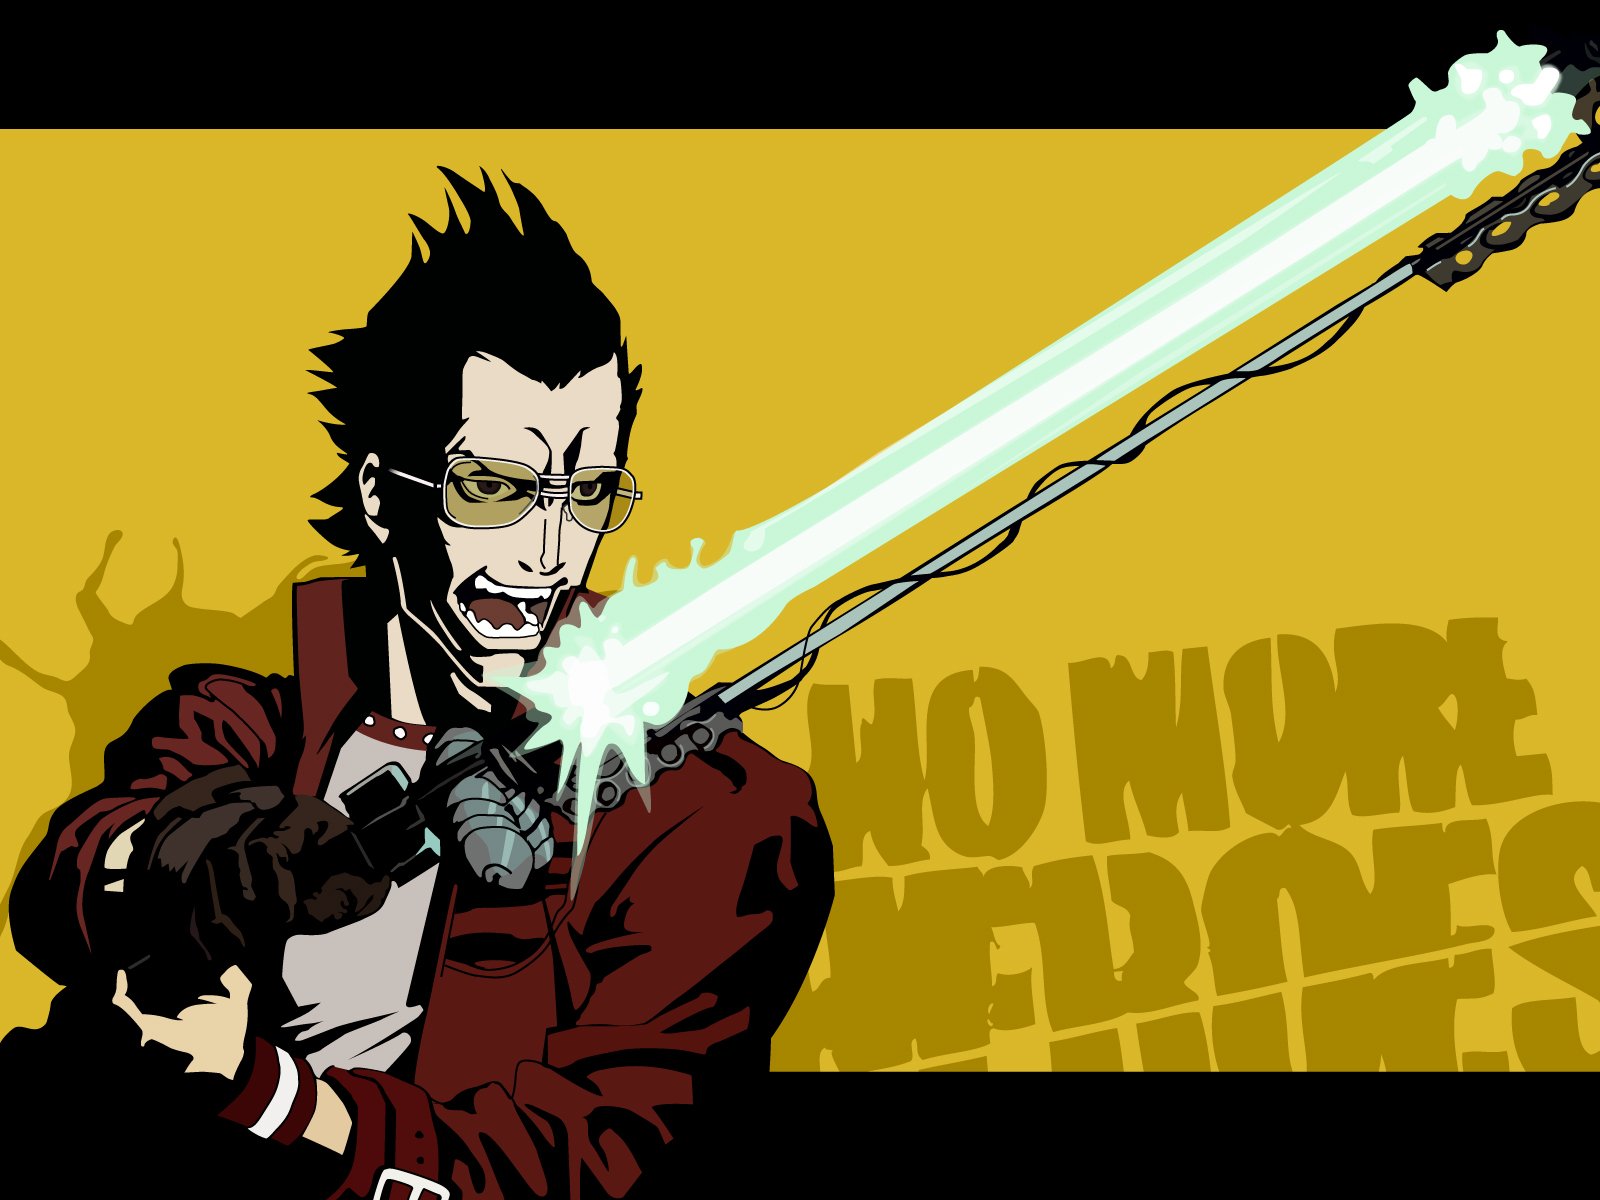 No More Heroes Wallpaper and Background Image | 1600x1200 | ID:242870